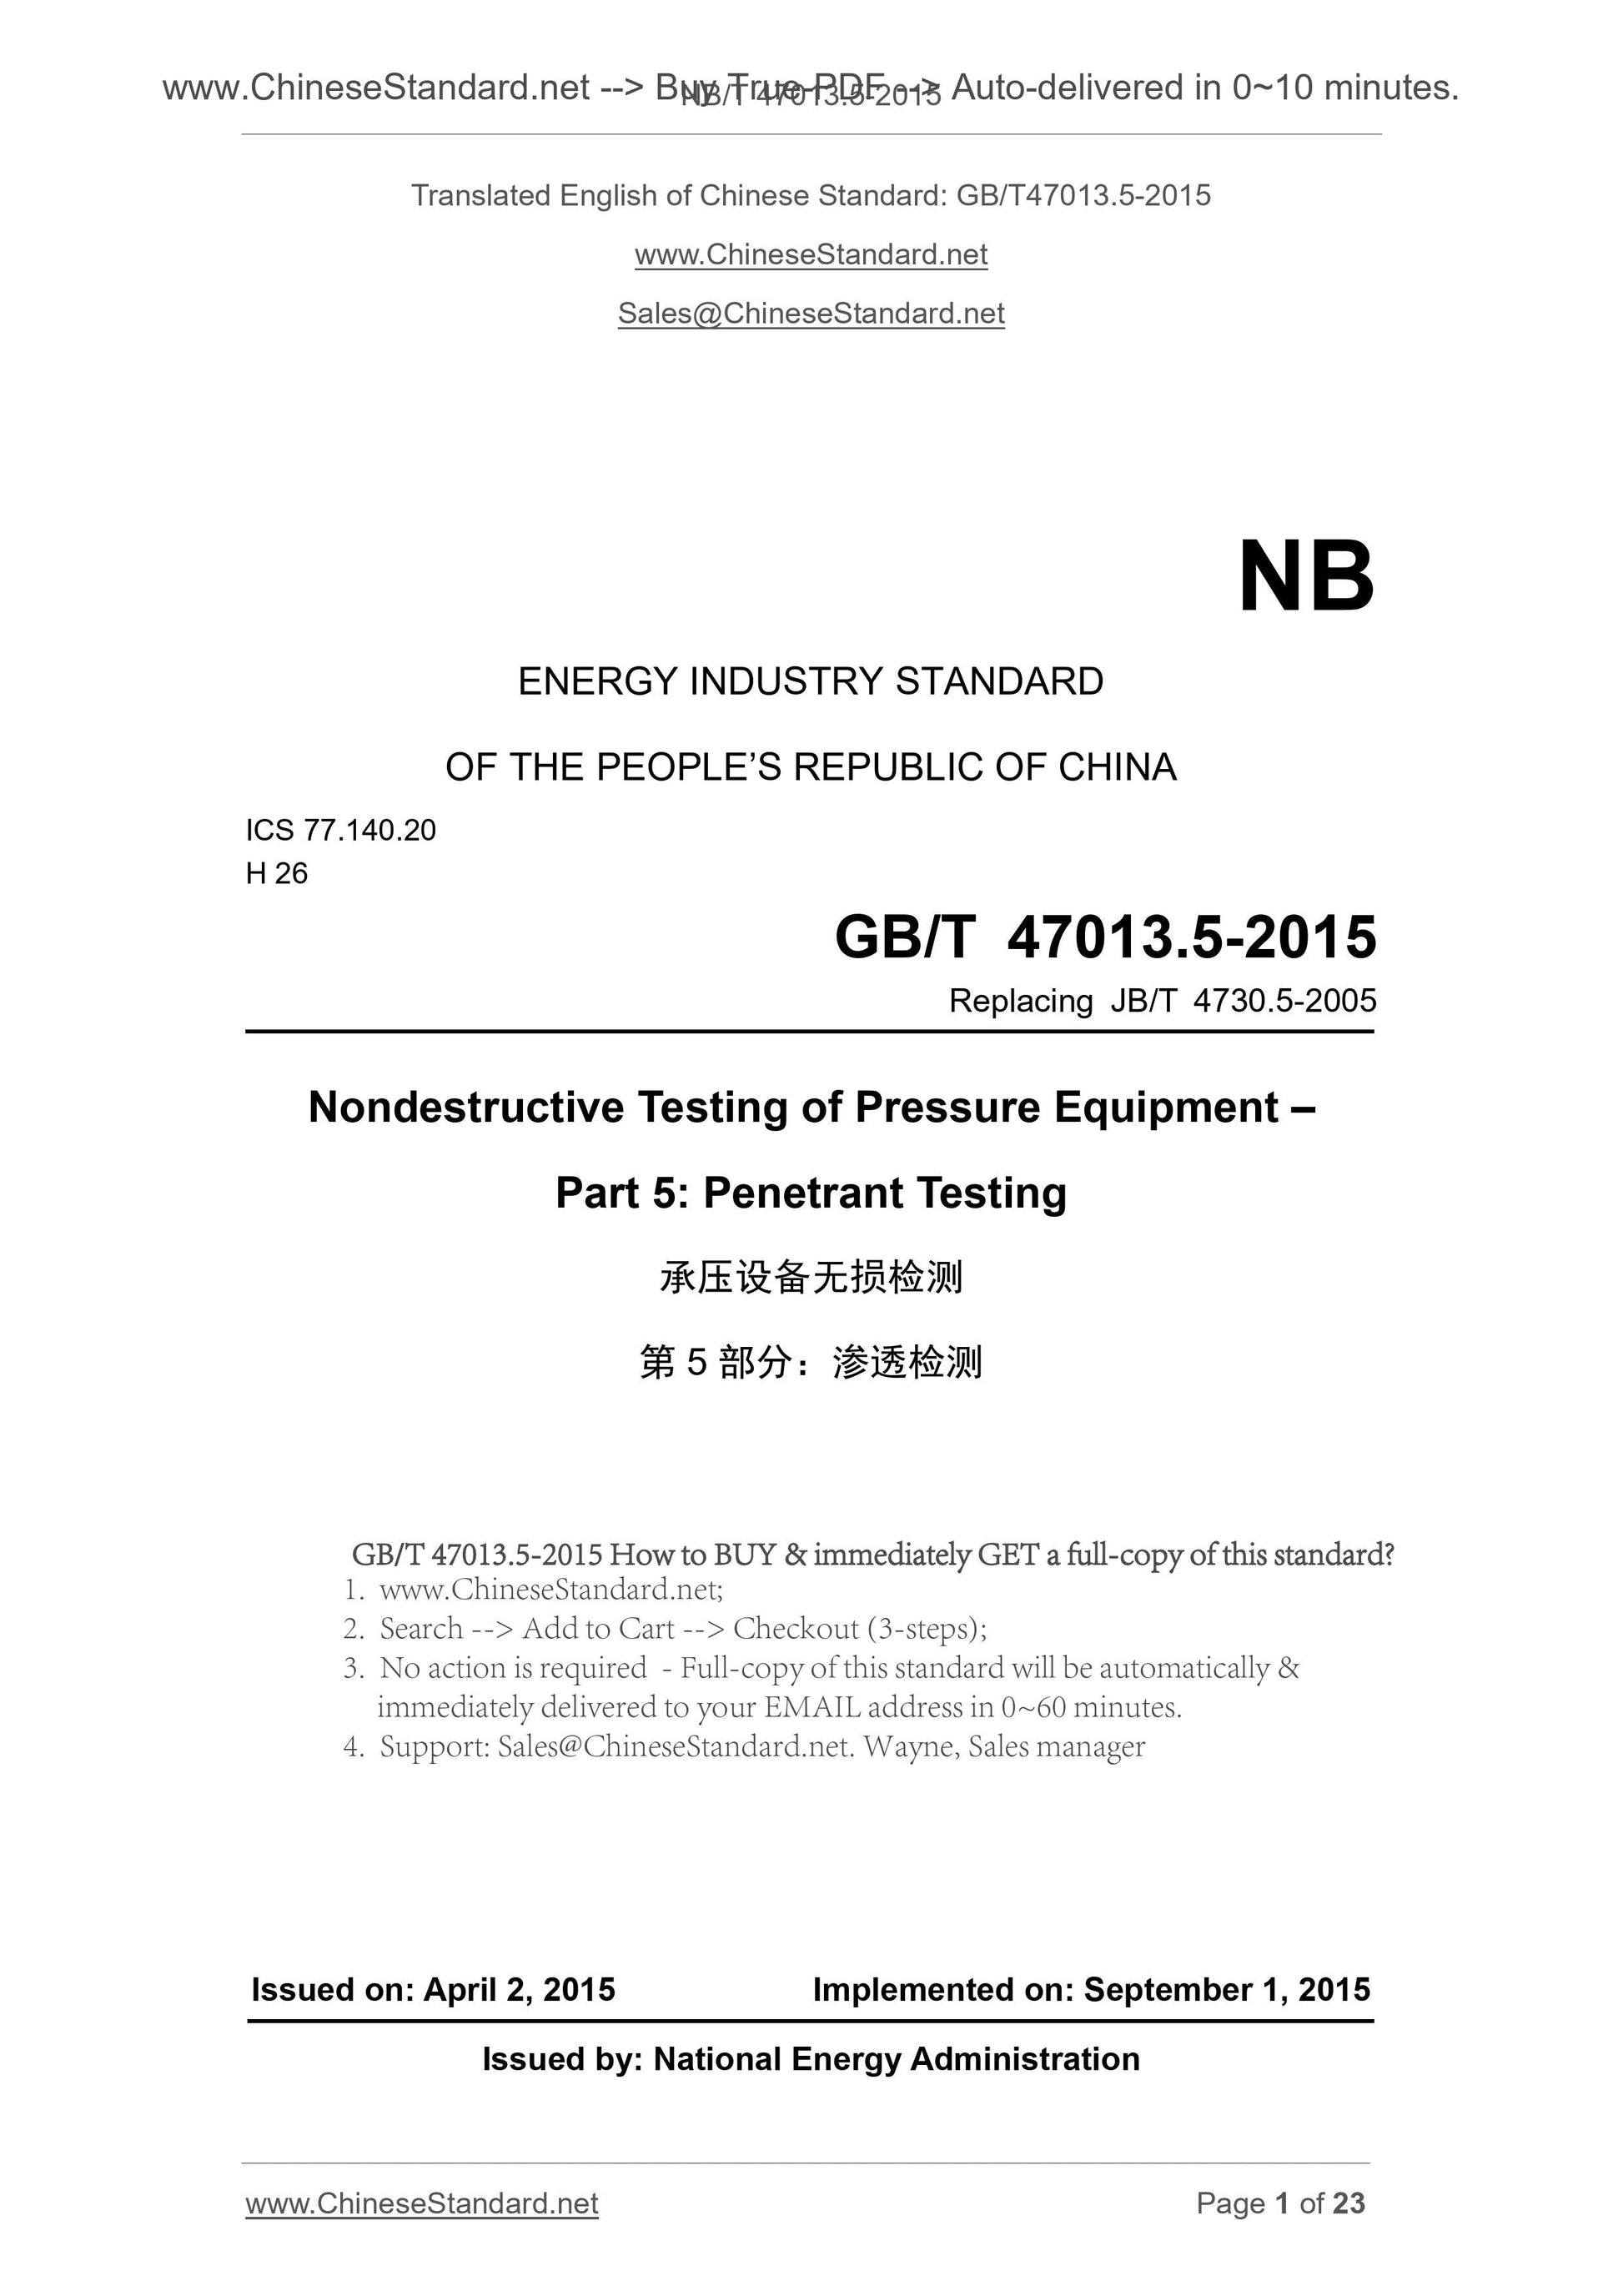 NB/T 47013.5-2015 Page 1